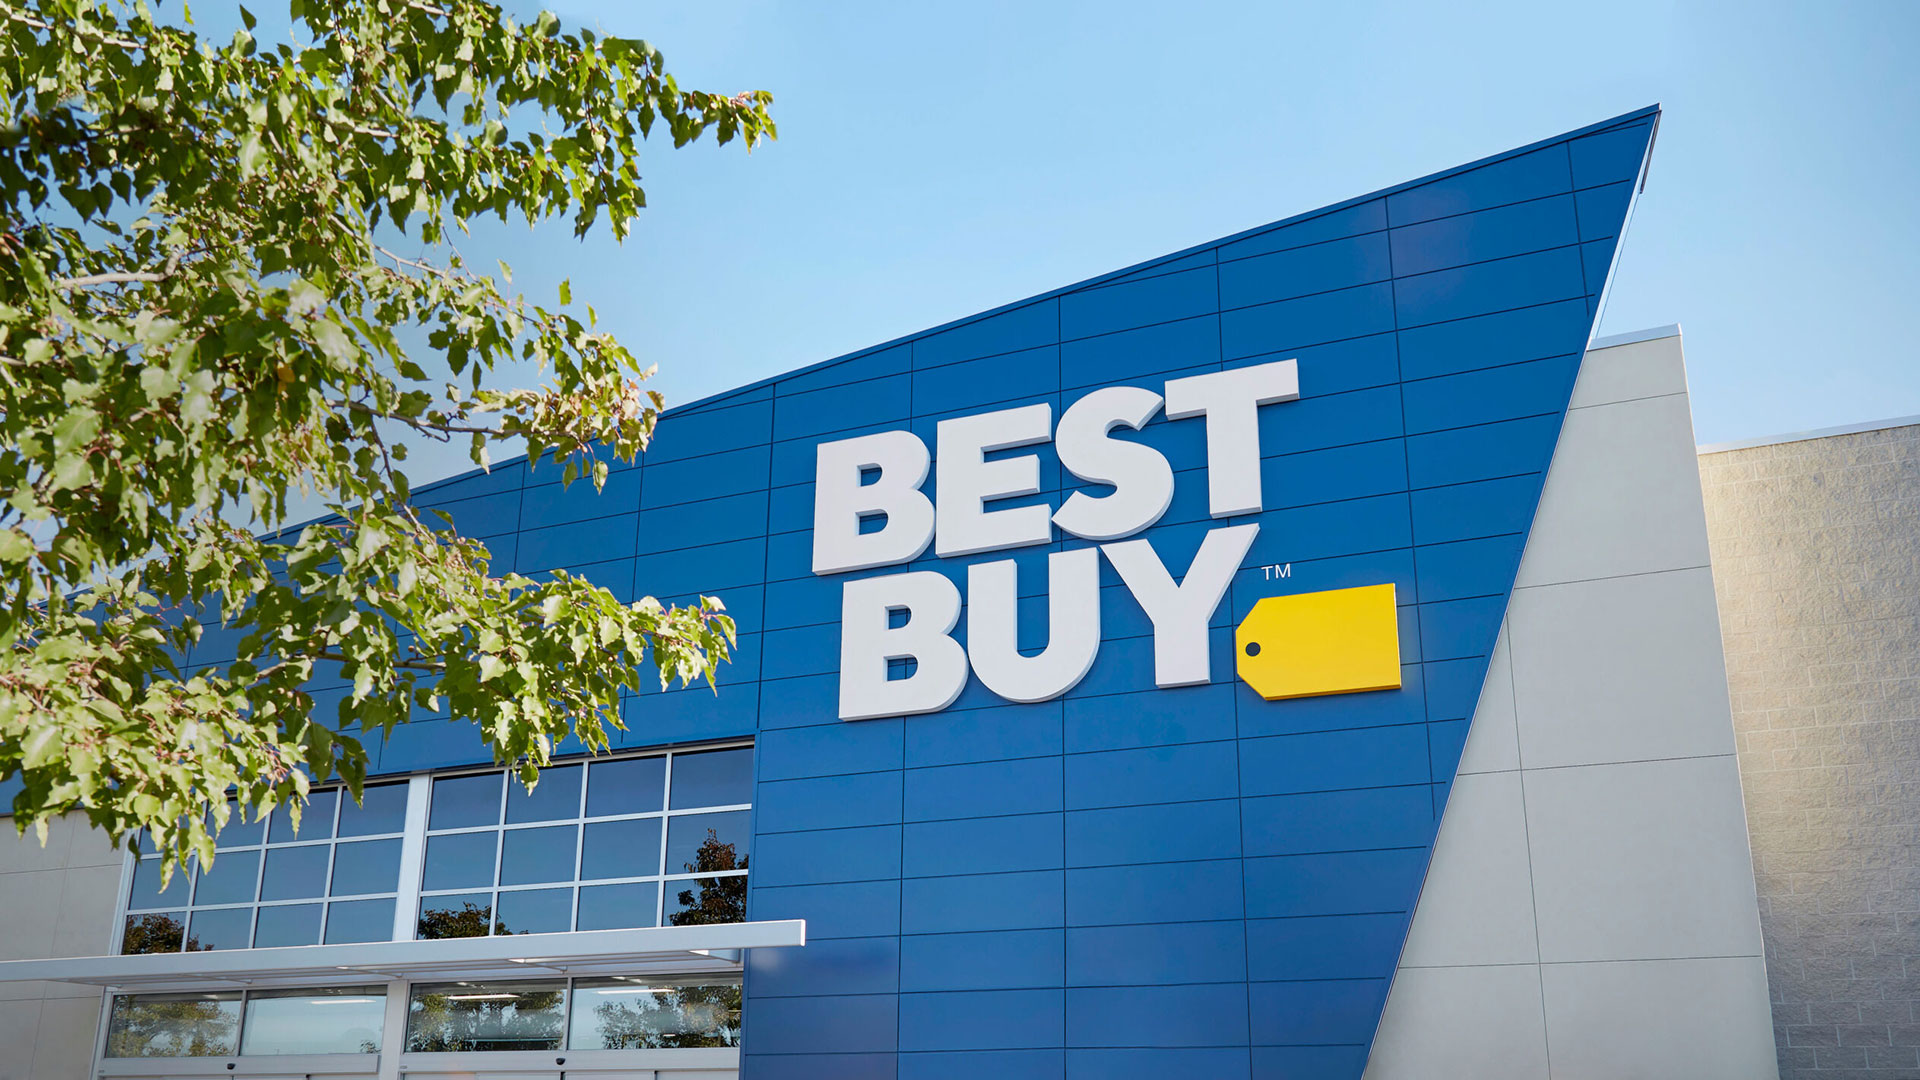 Best Buy is currently holding its massive back to school sale